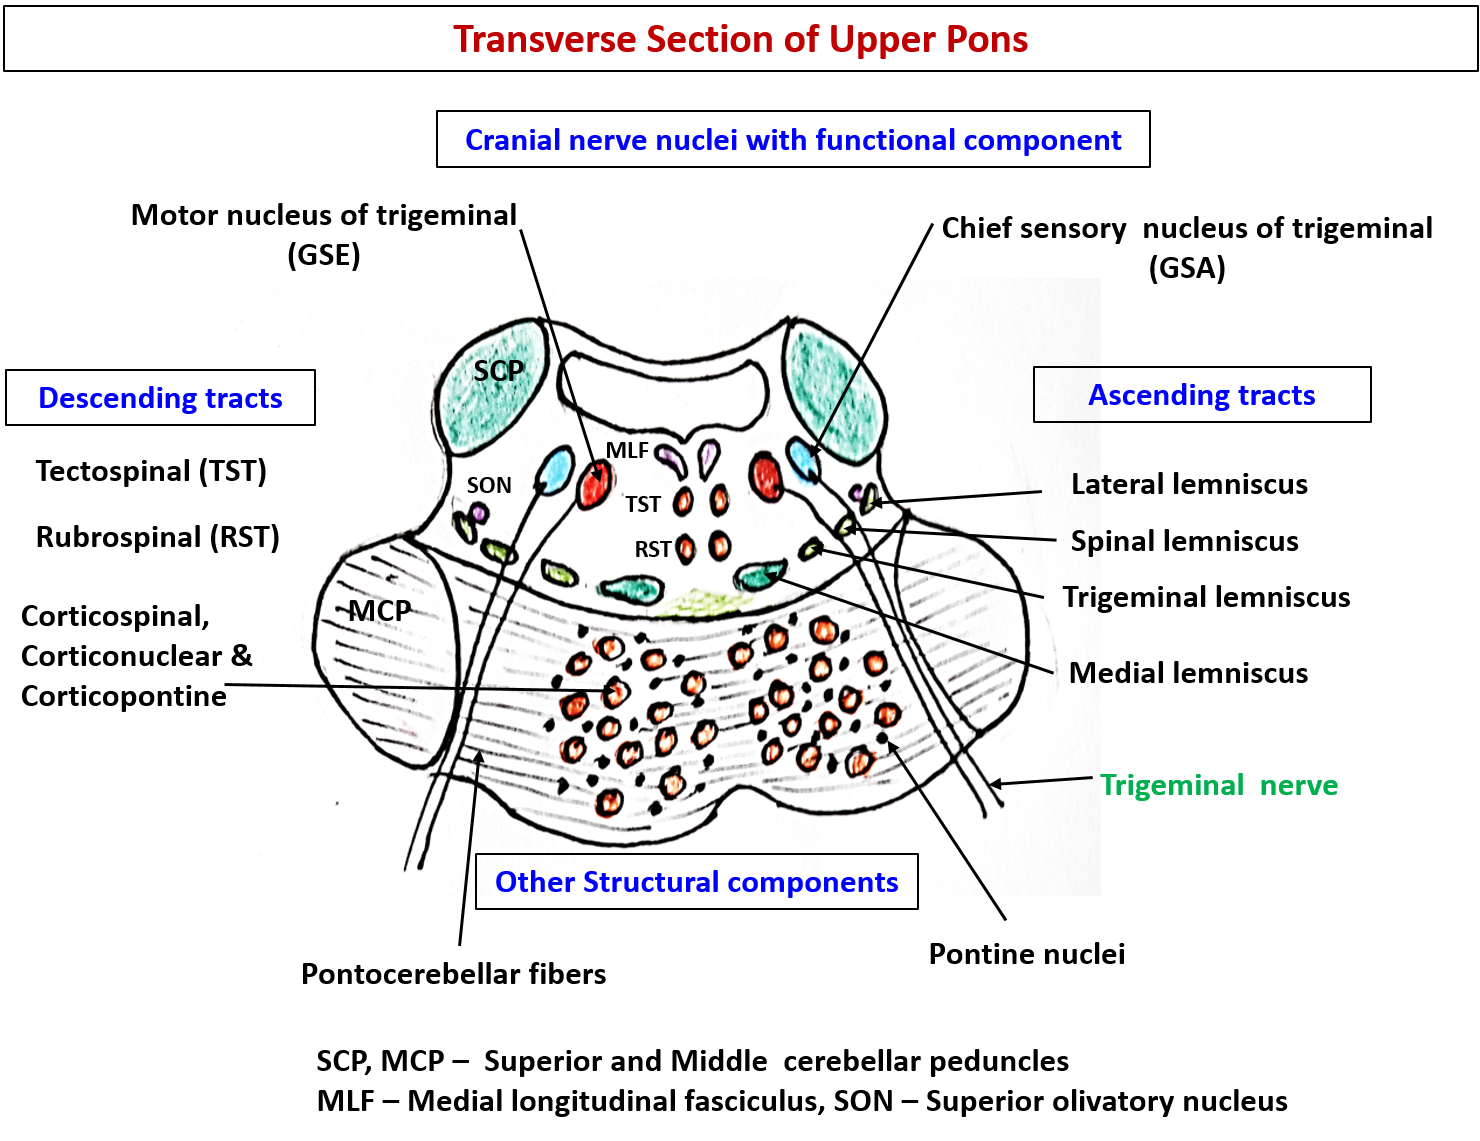 pons anatomy - transverse section of upper pons